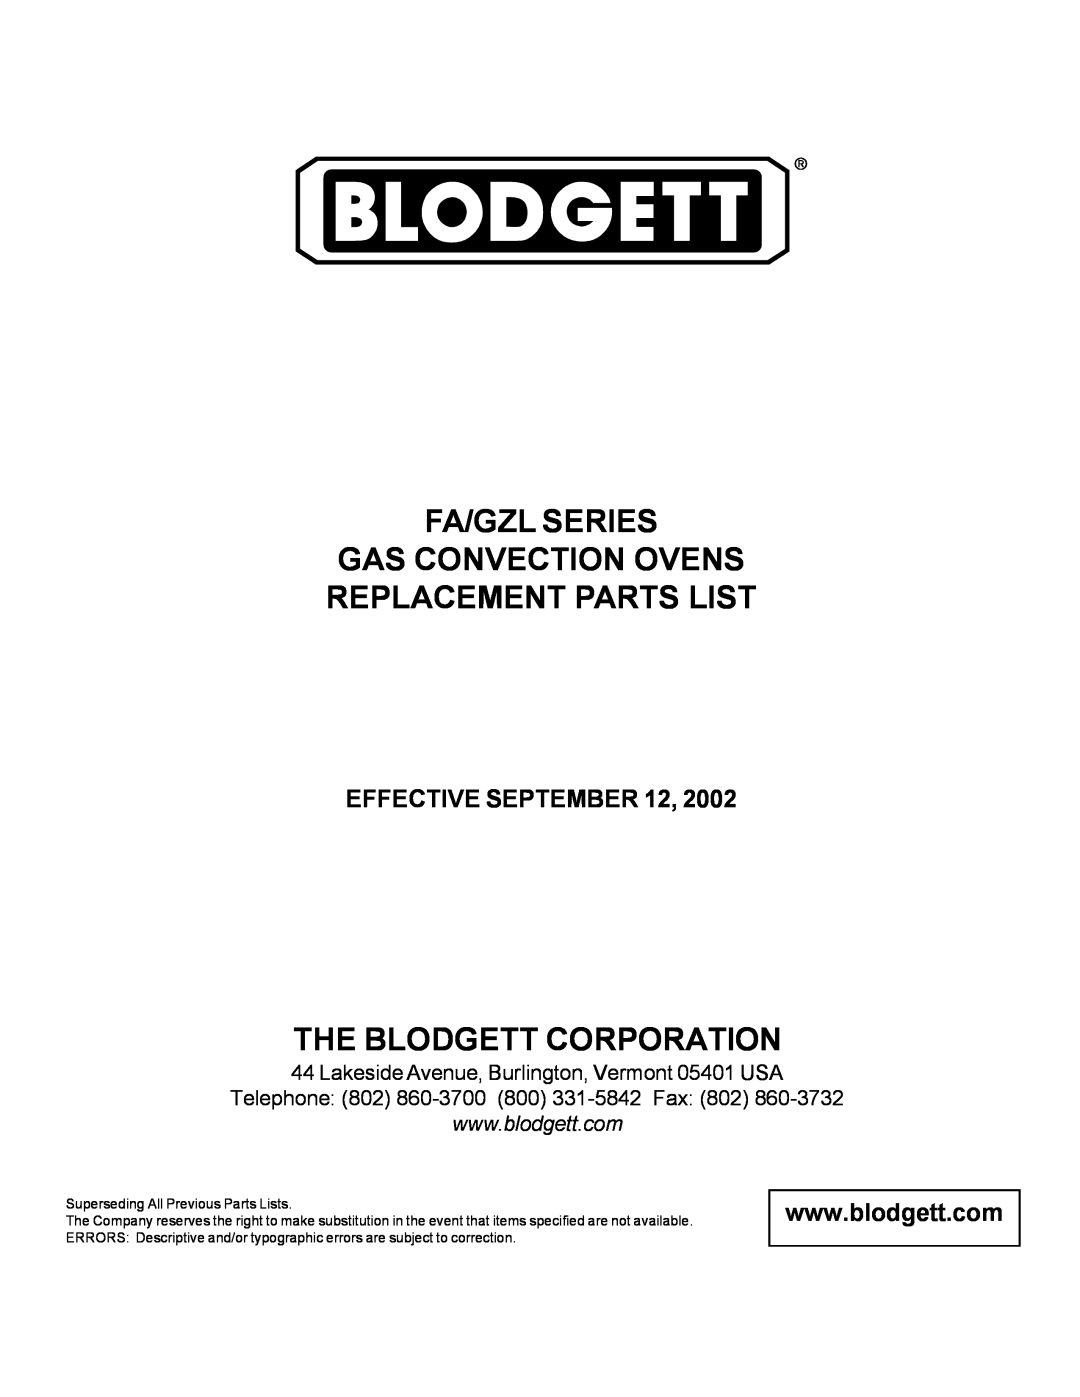 Blodgett FA/GZL manual EFFECTIVE SEPTEMBER 12, Fa/Gzl Series Gas Convection Ovens, Replacement Parts List 